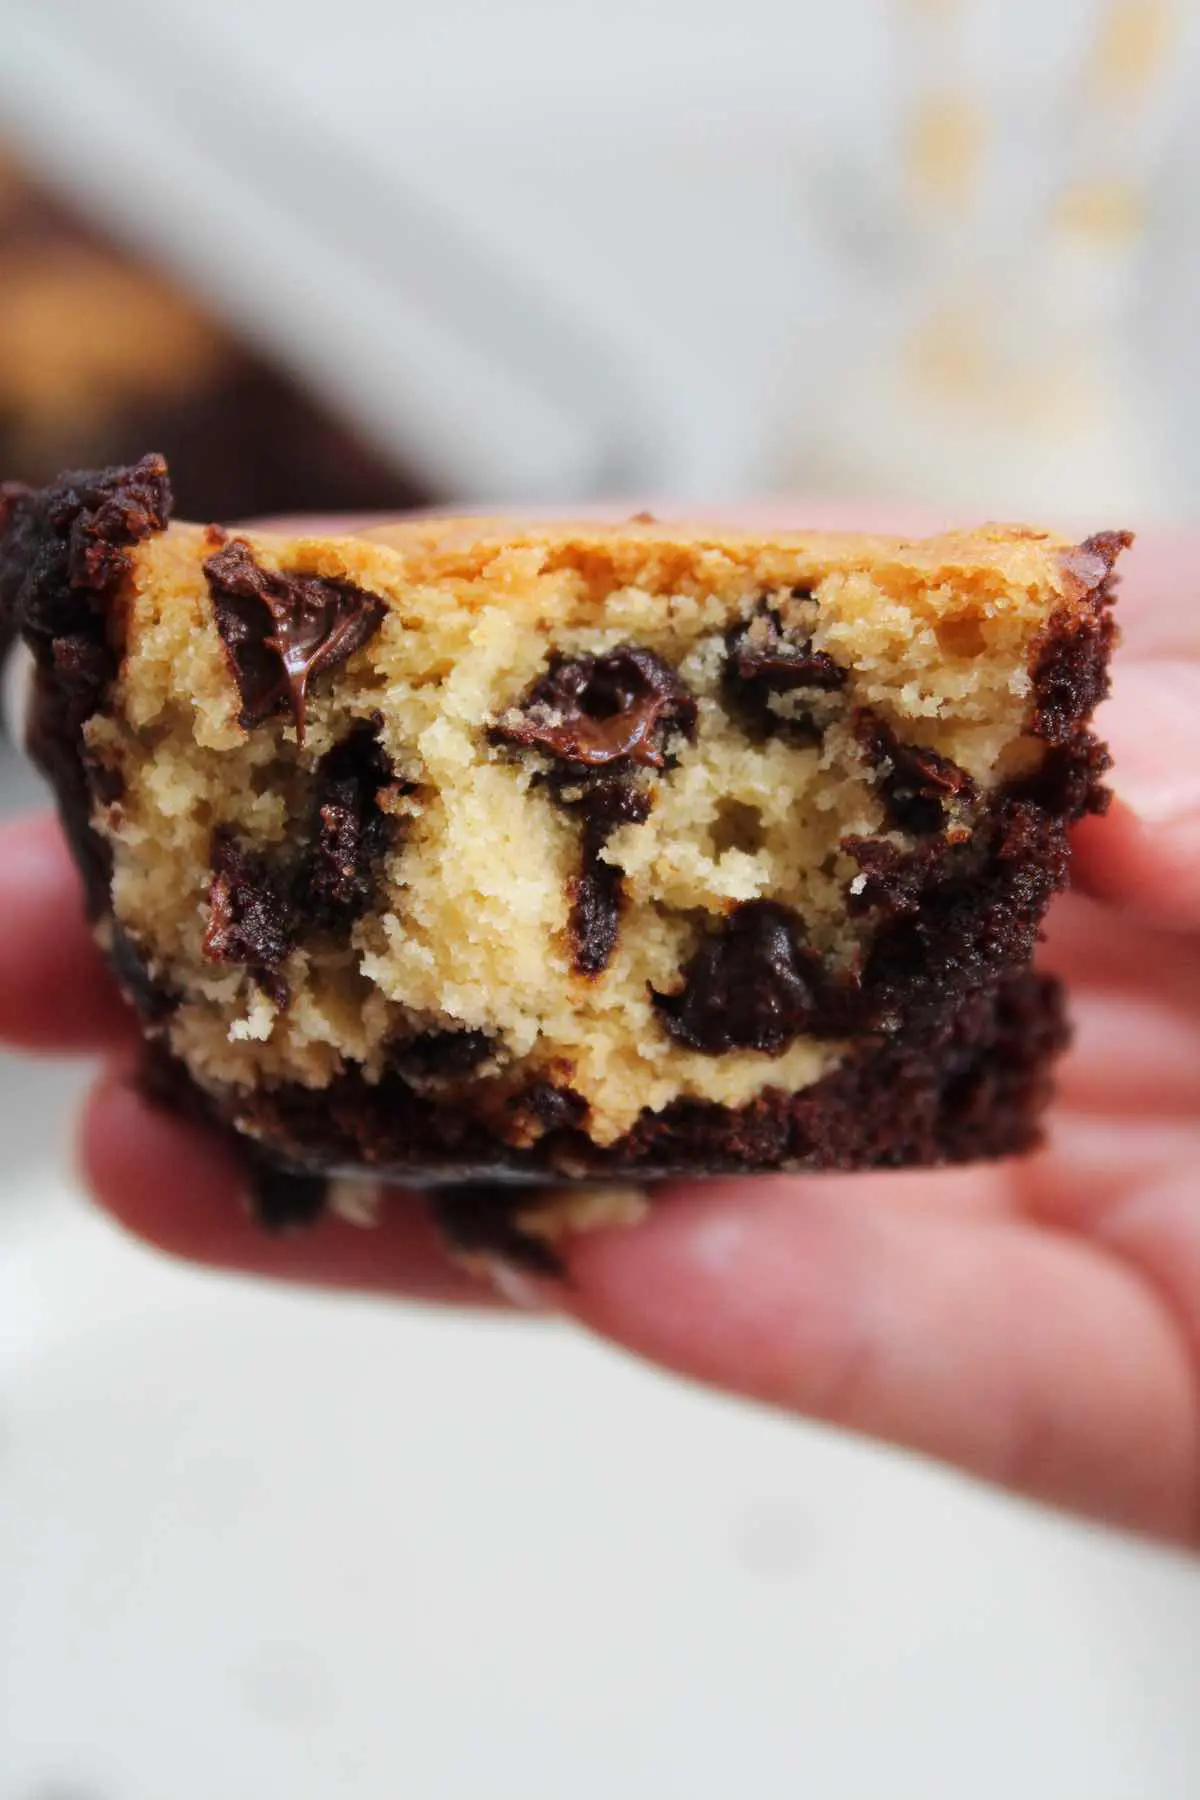 Domino's copycat recipe for marbled cookie brownie made right at home.